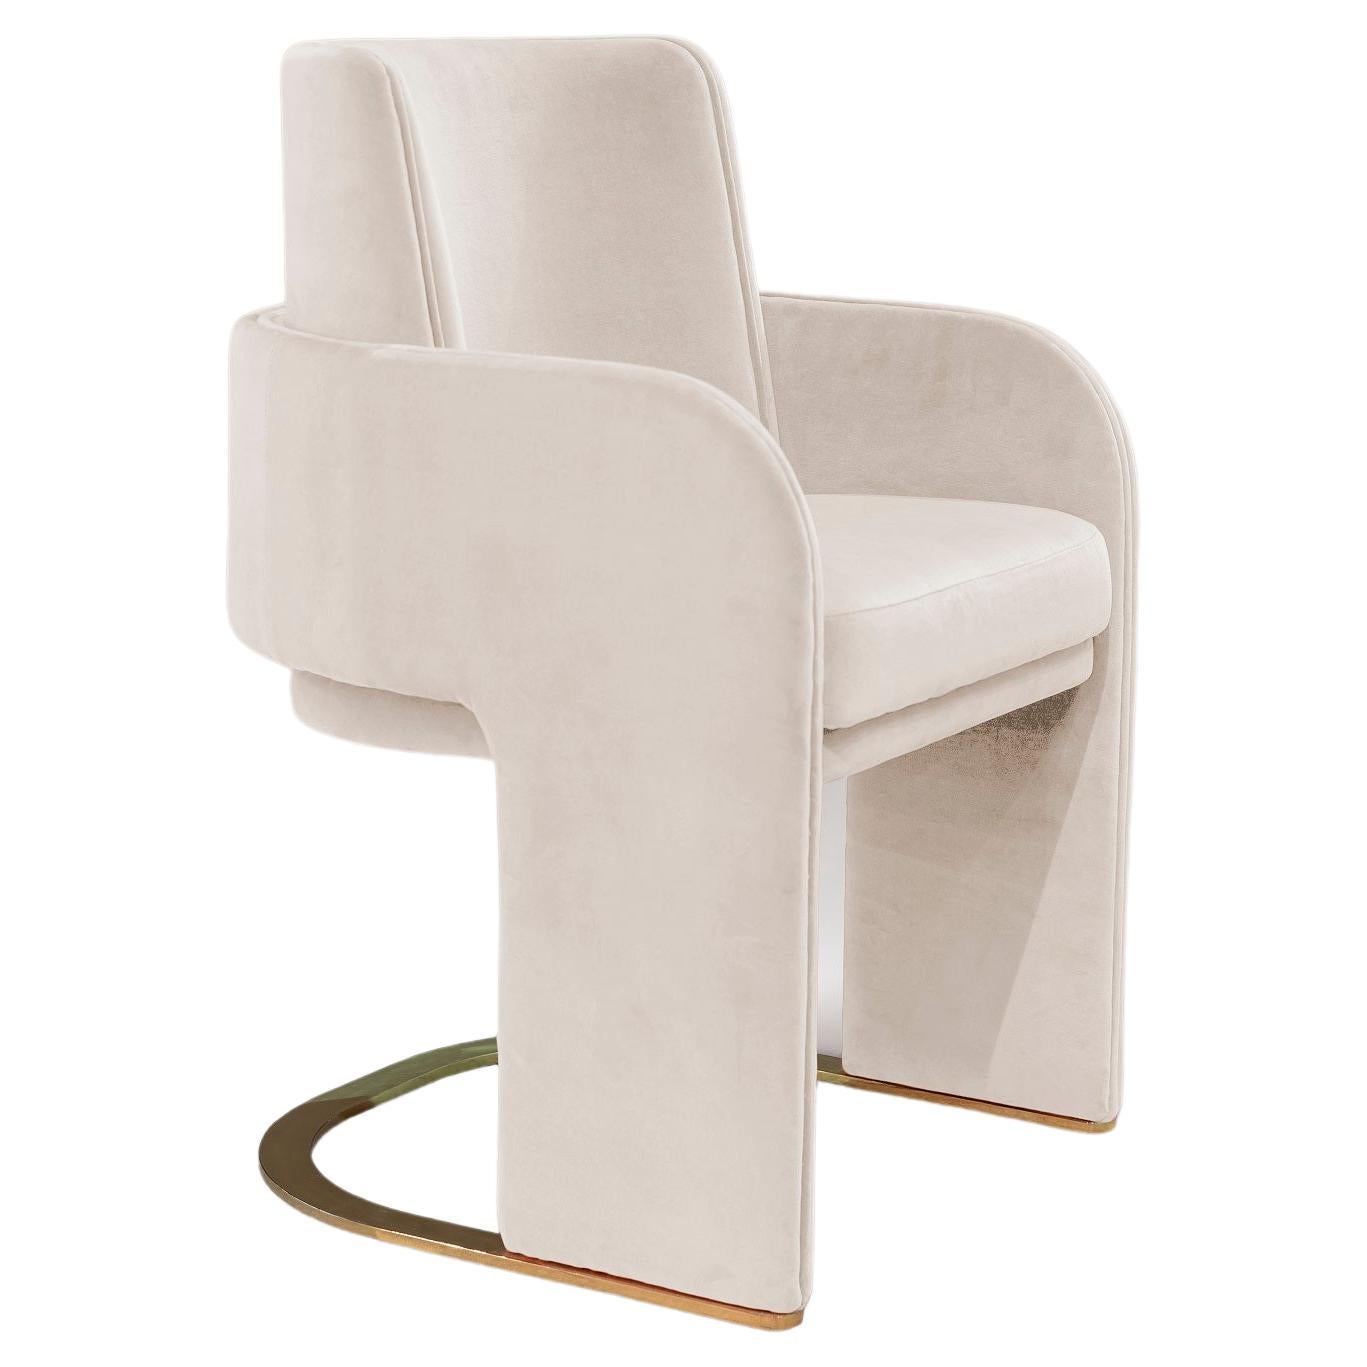 DOOQ Dining Chair Odisseia with Soft Light Cotton Velvet and Brass For Sale